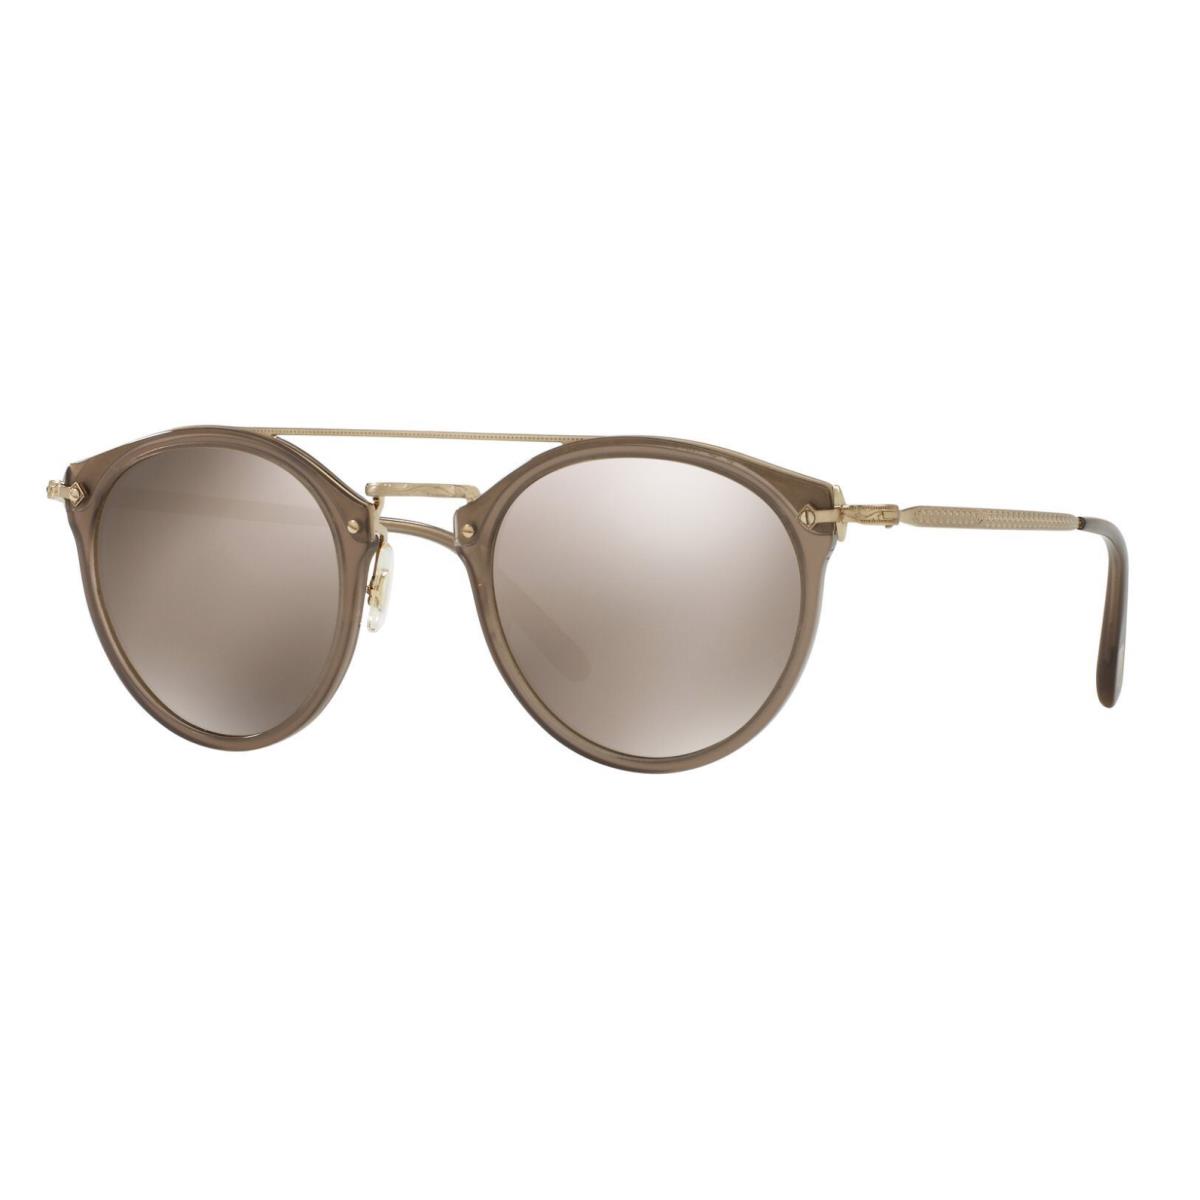 Oliver Peoples Womens Remick 50mm Taupe Mirrored Brow Bar Sunglasses S3838 - Frame: Gold / Taupe, Lens: Grey